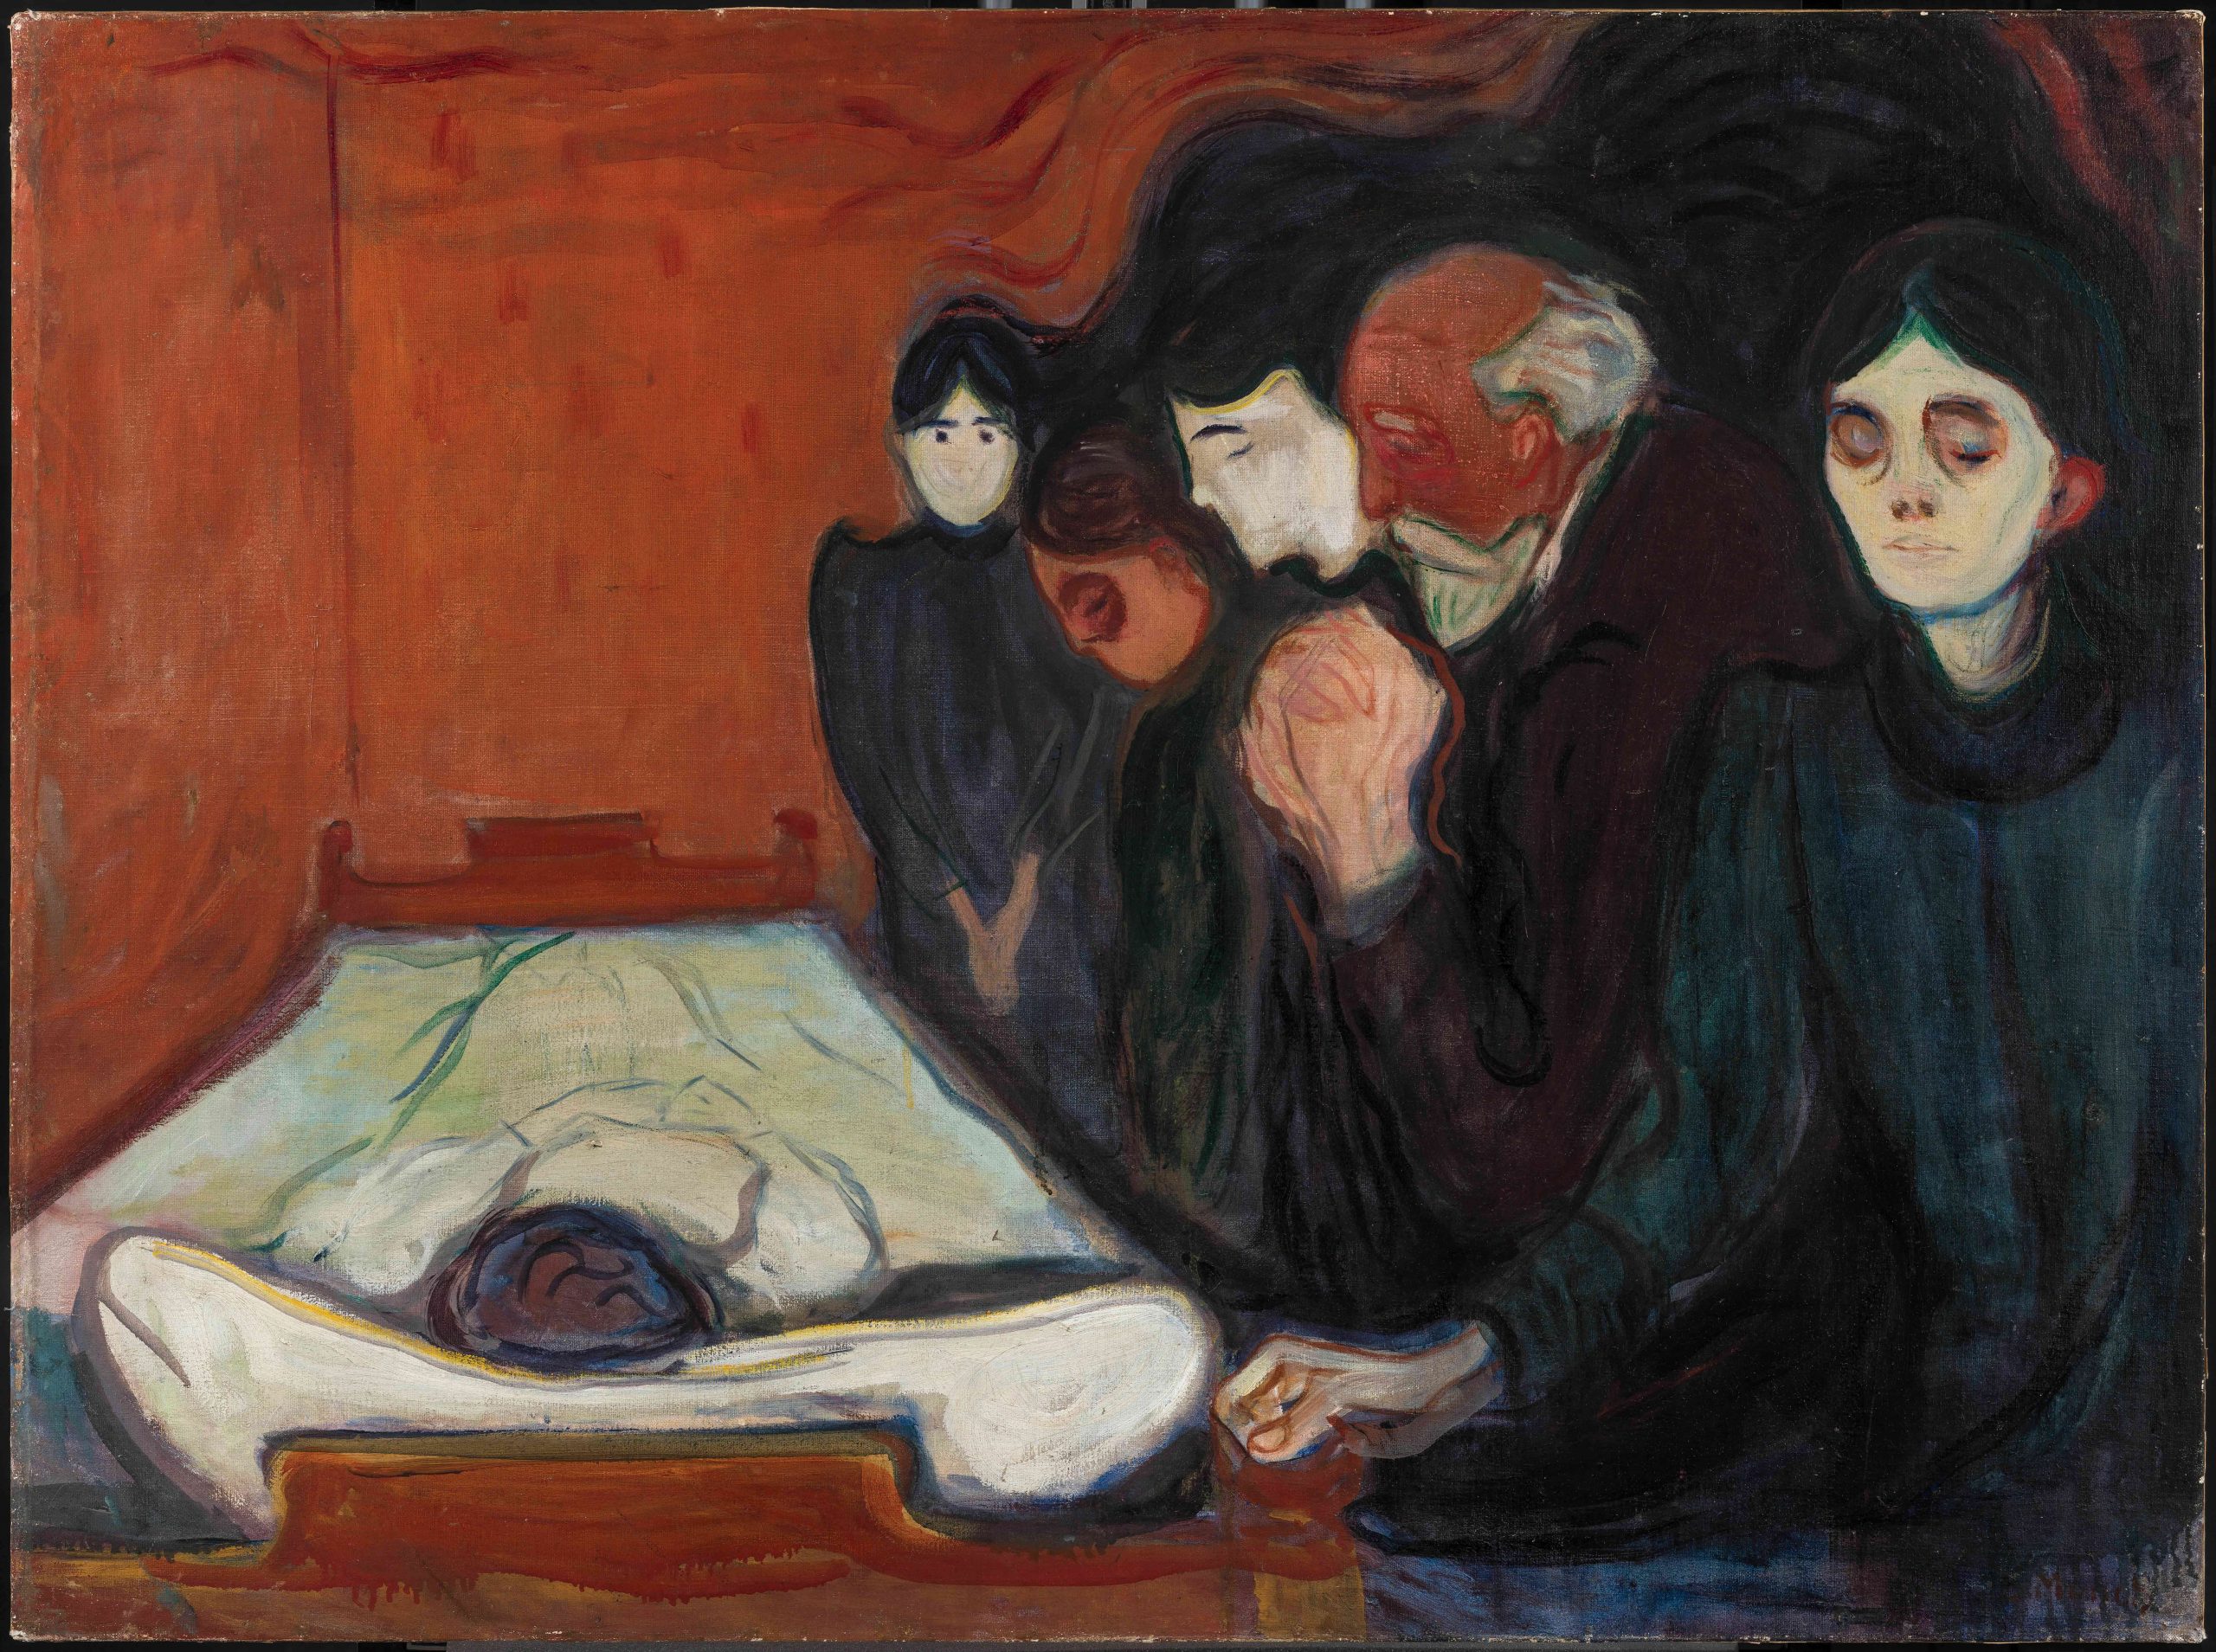 Edvard Munch, (1863-1944), At the Deathbed, 1895, KODE Art Museums, Bergen, Norway.